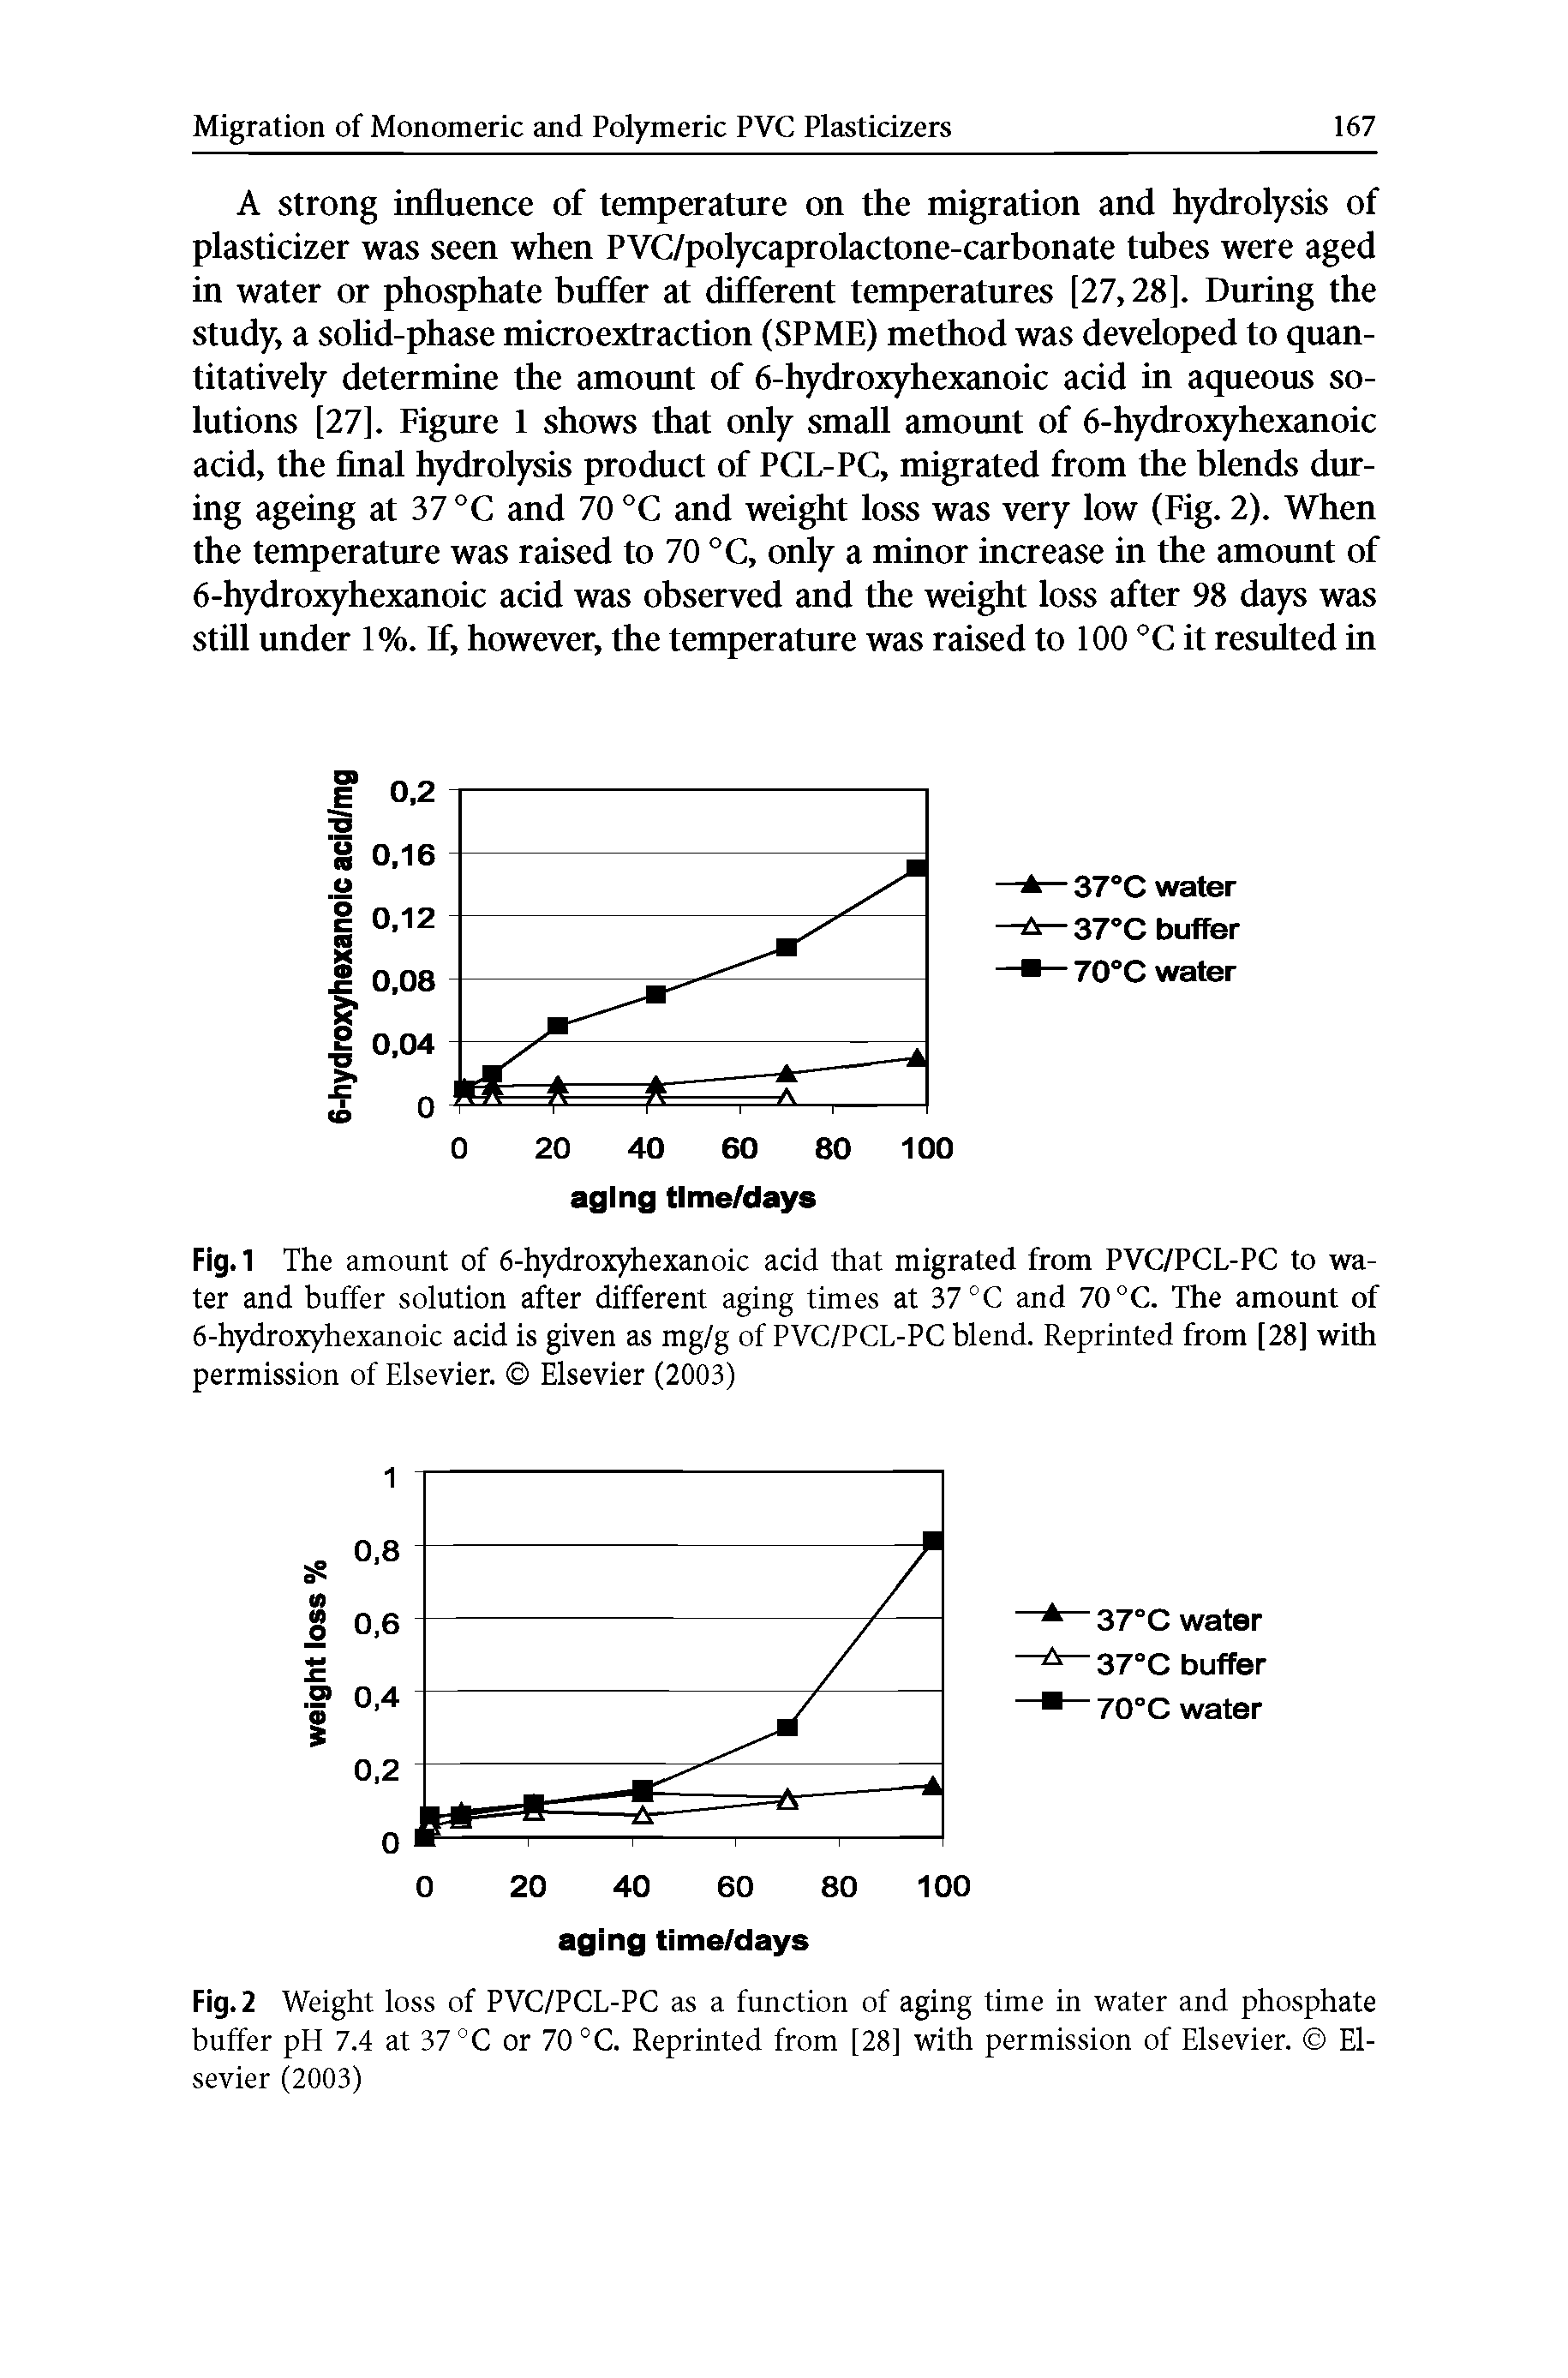 Fig.1 The amount of 6-hydroxyhexanoic acid that migrated from PVC/PCL-PC to water and buffer solution after different aging times at 37 °C and 70 °C. The amount of 6-hydroxyhexanoic acid is given as mg/g of PVC/PCL-PC blend. Reprinted from [28] with permission of Elsevier. Elsevier (2003)...